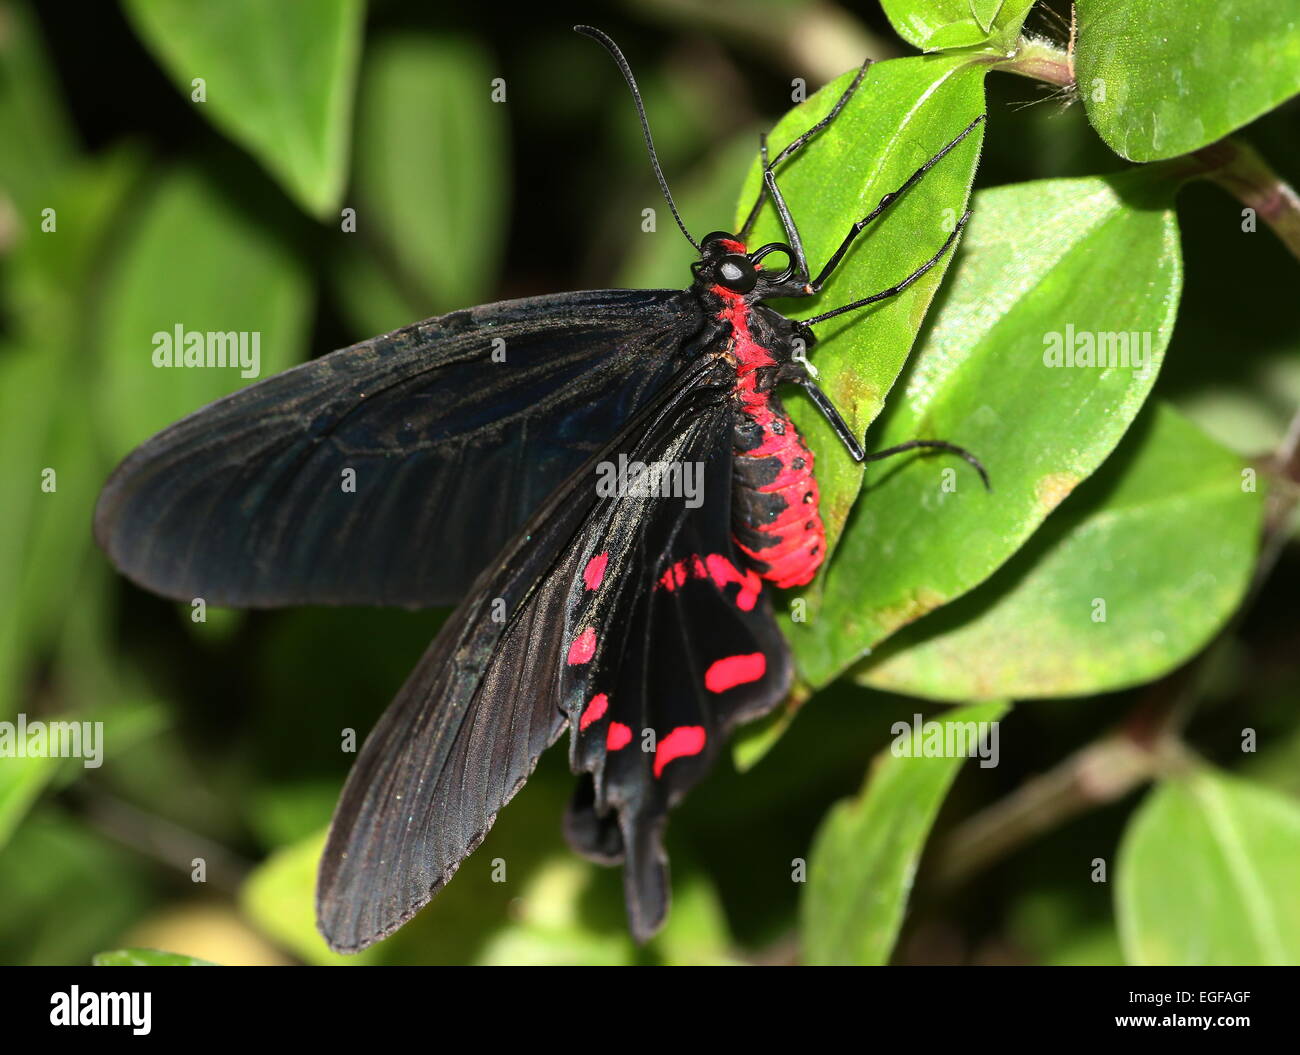 Pink Rose Swallowtail (Pachliopta kotzebuea), native to the Philippines, posing on a leaf, ventral view Stock Photo